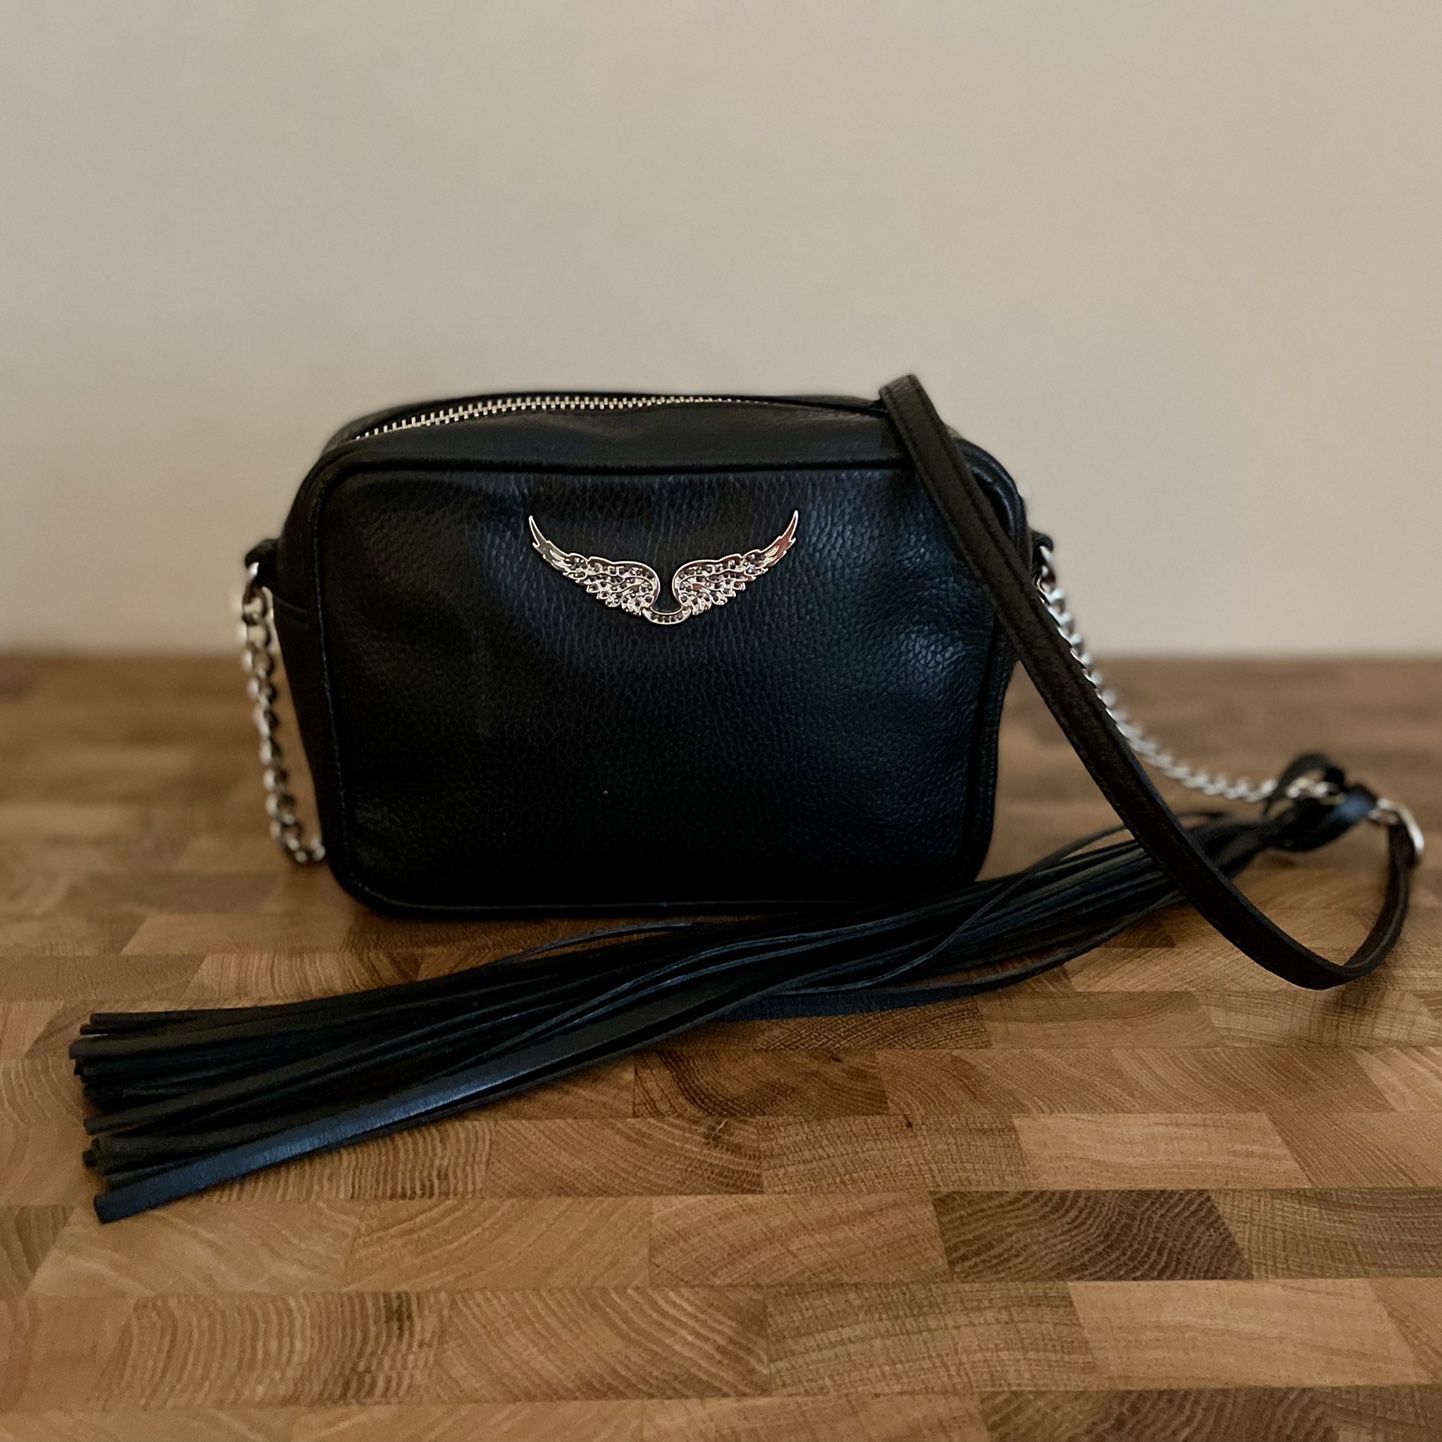 original zadig & voltaire bag for Sale in Lincoln Acres, CA - OfferUp